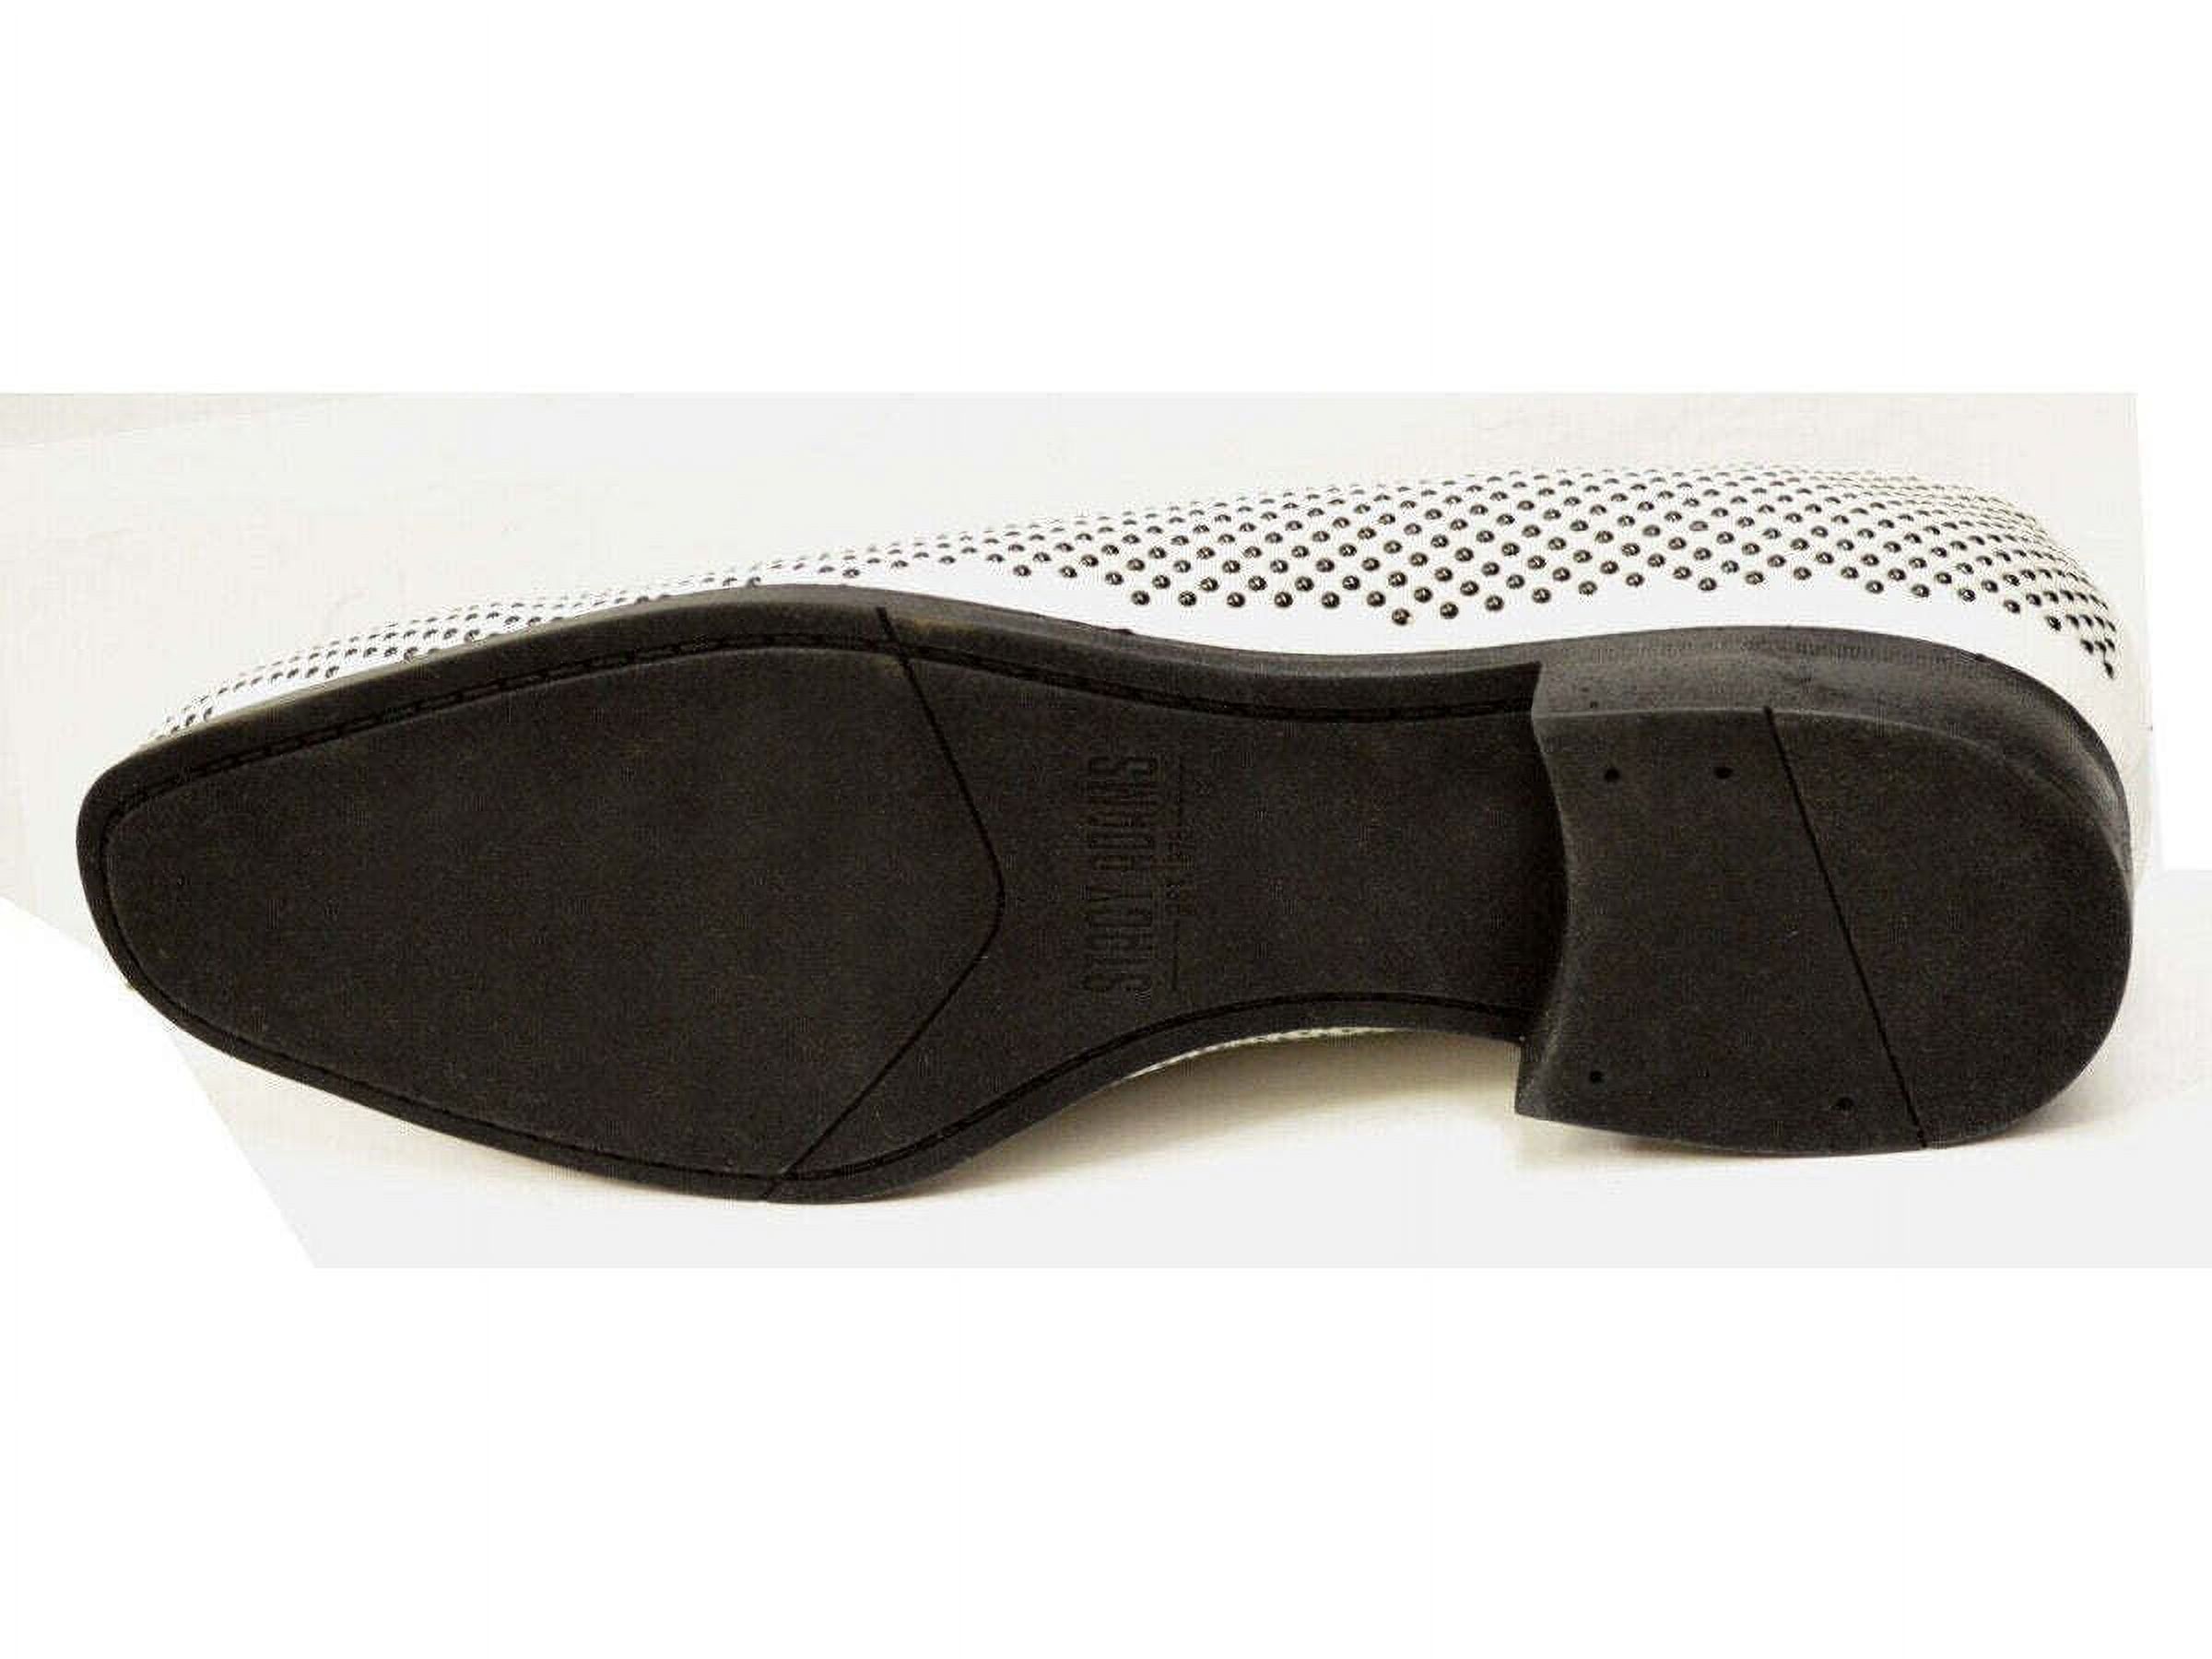 Stacy Adams Men Shoes Swagger Studded Slip On Satin Black White Formal 25228-111 - image 4 of 4